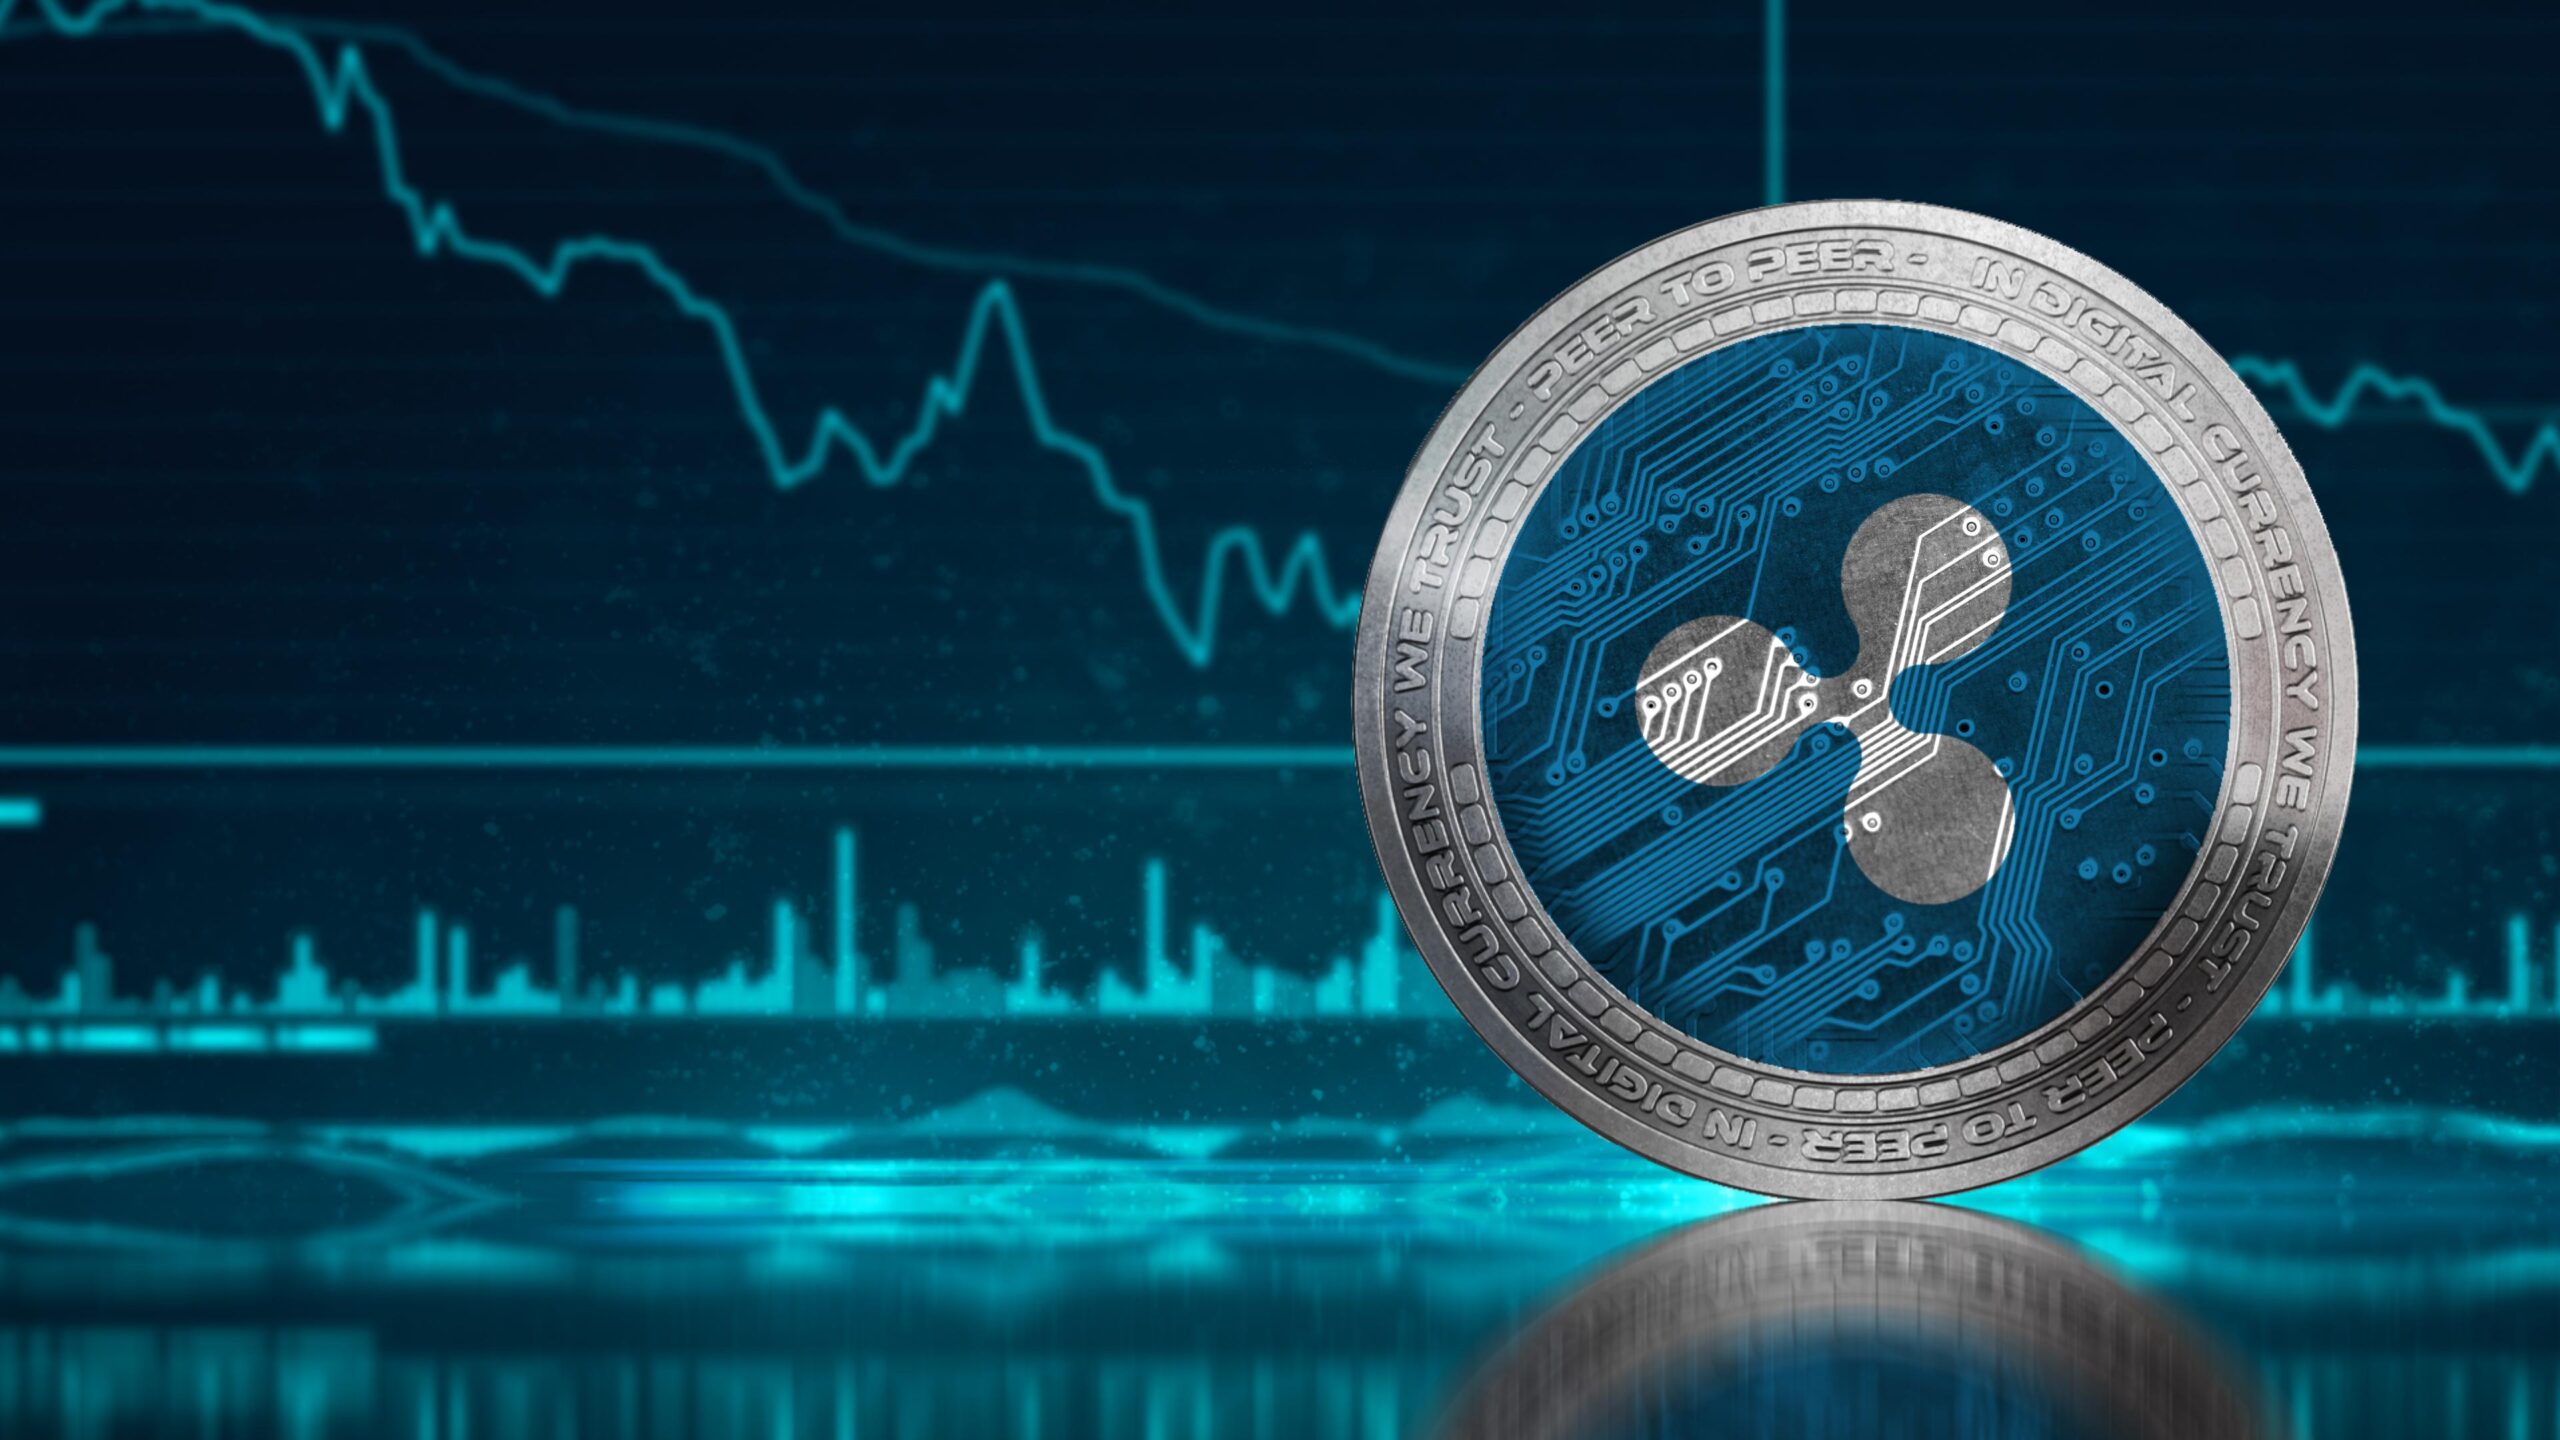 ripple-xrp-fails-to-hit-double-digit-gain-what-could-be-wrong